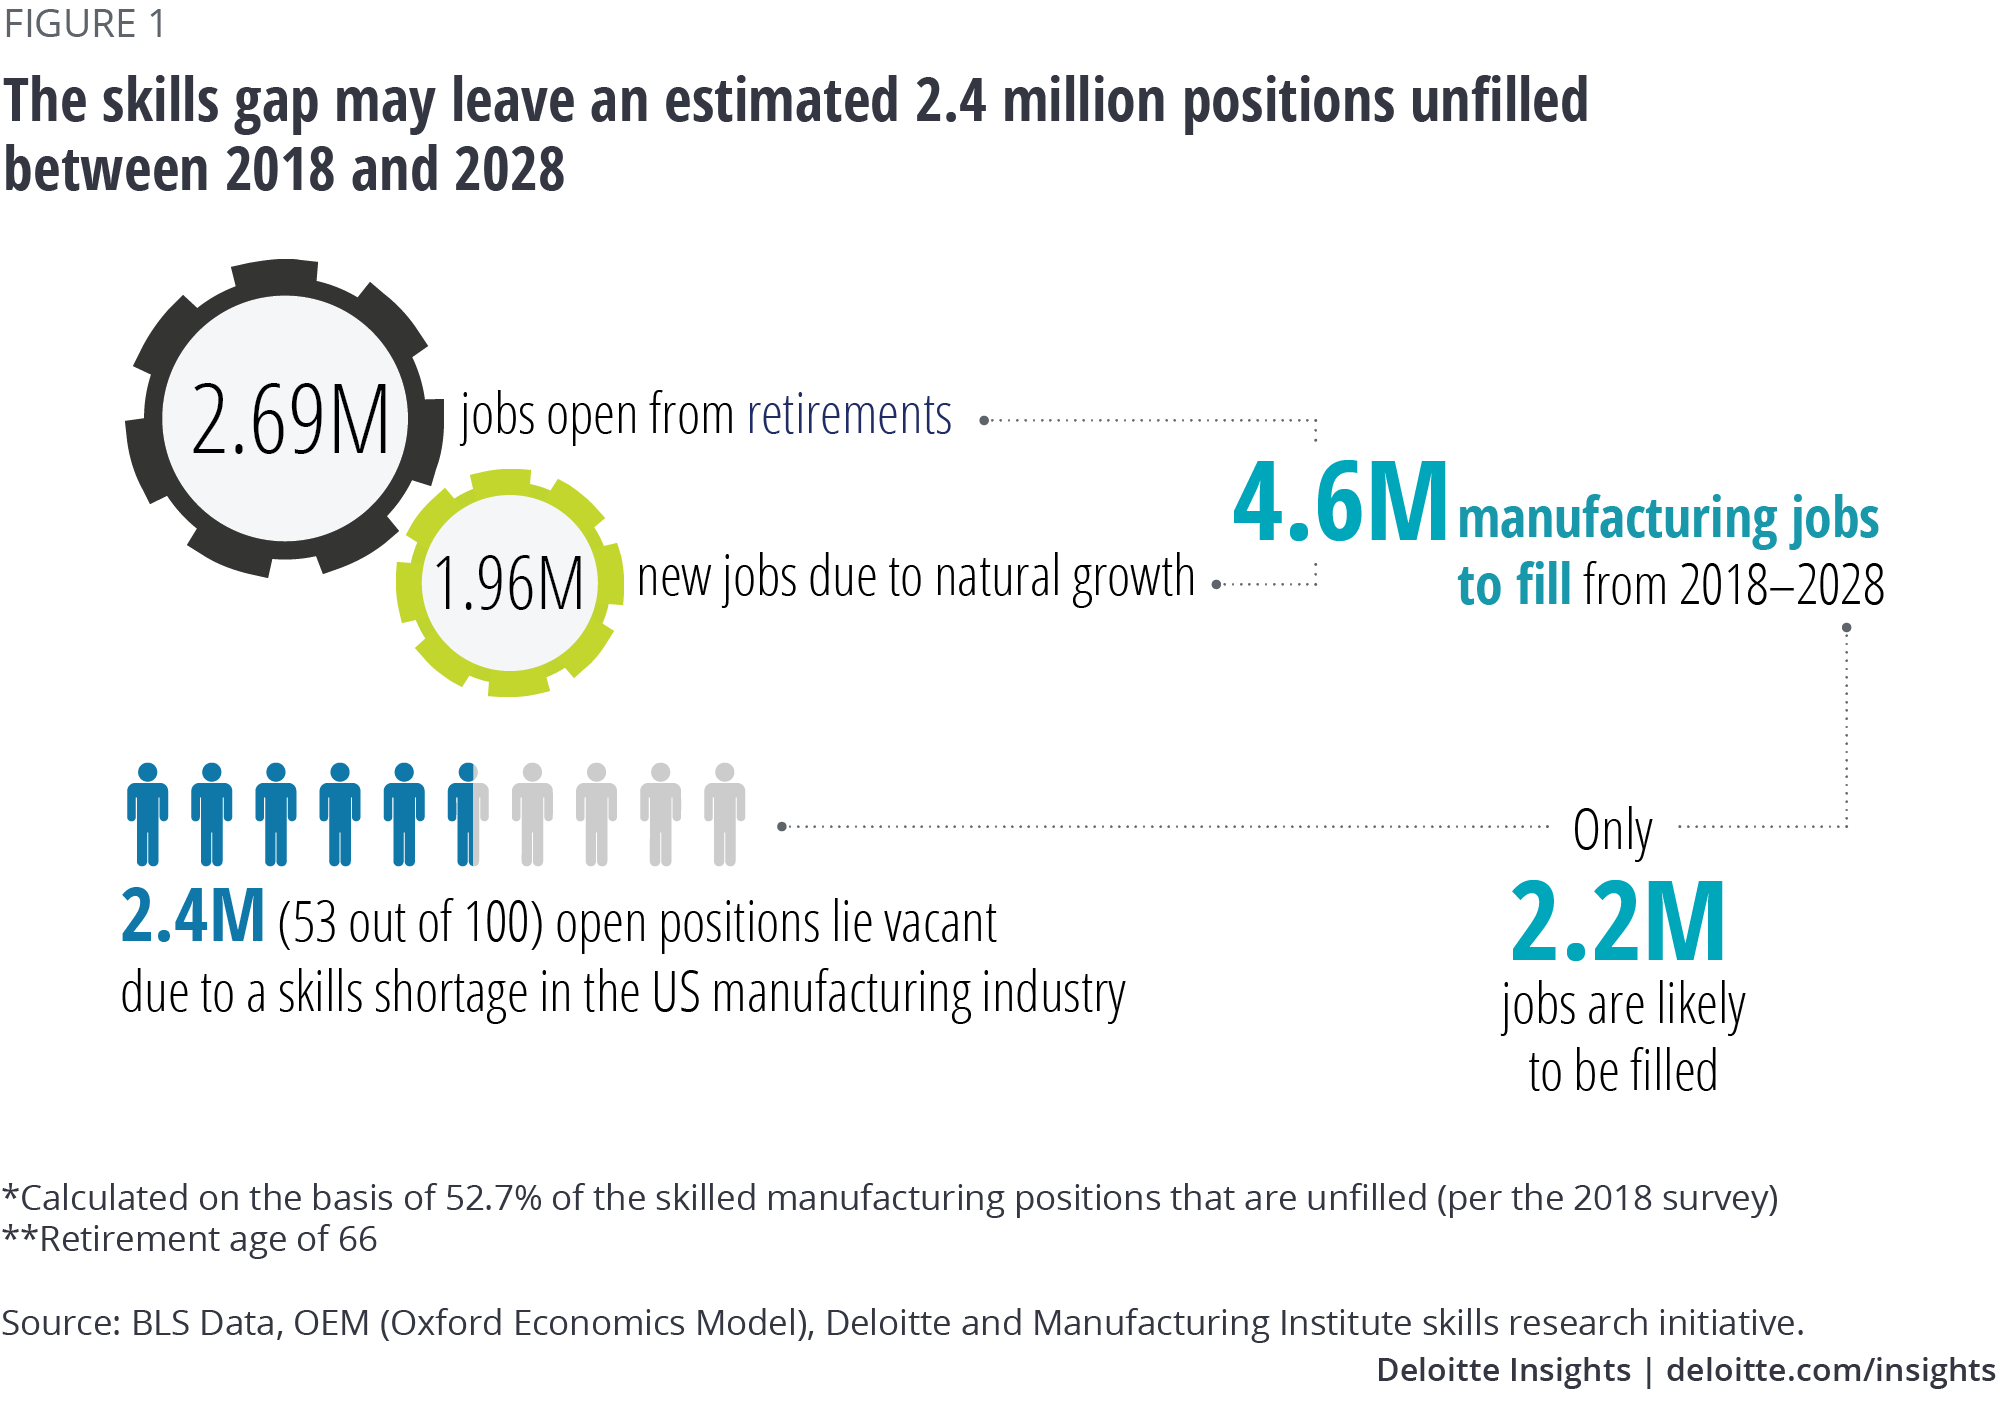 The skills gap may leave an estimated 2.4 million positions unfilled between 2018 and 2028